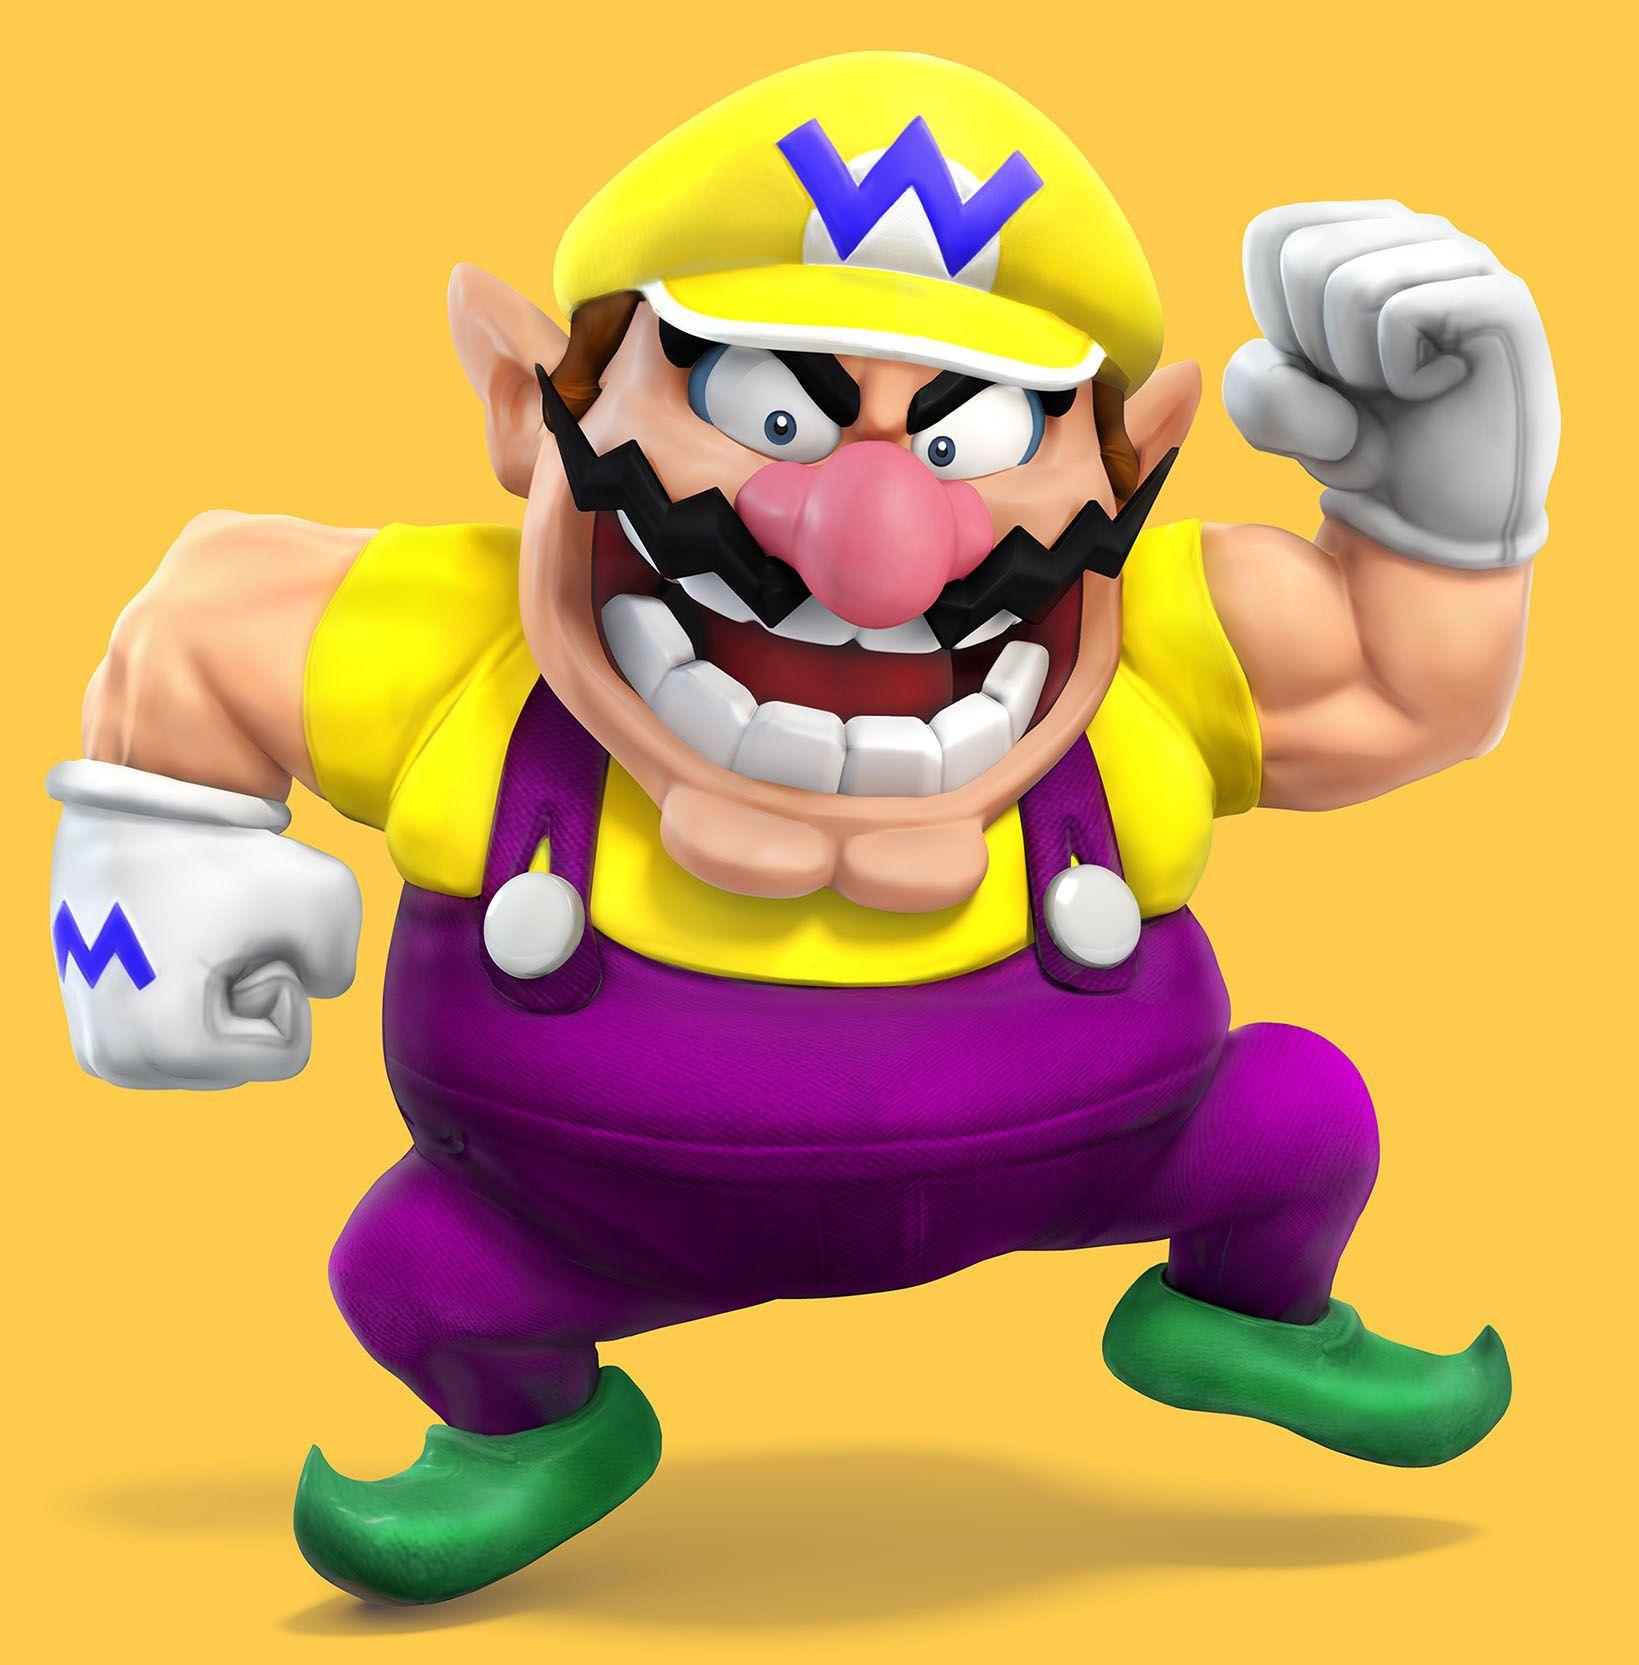 Wario from the Mario Bros. Series and many other Nintendo Games